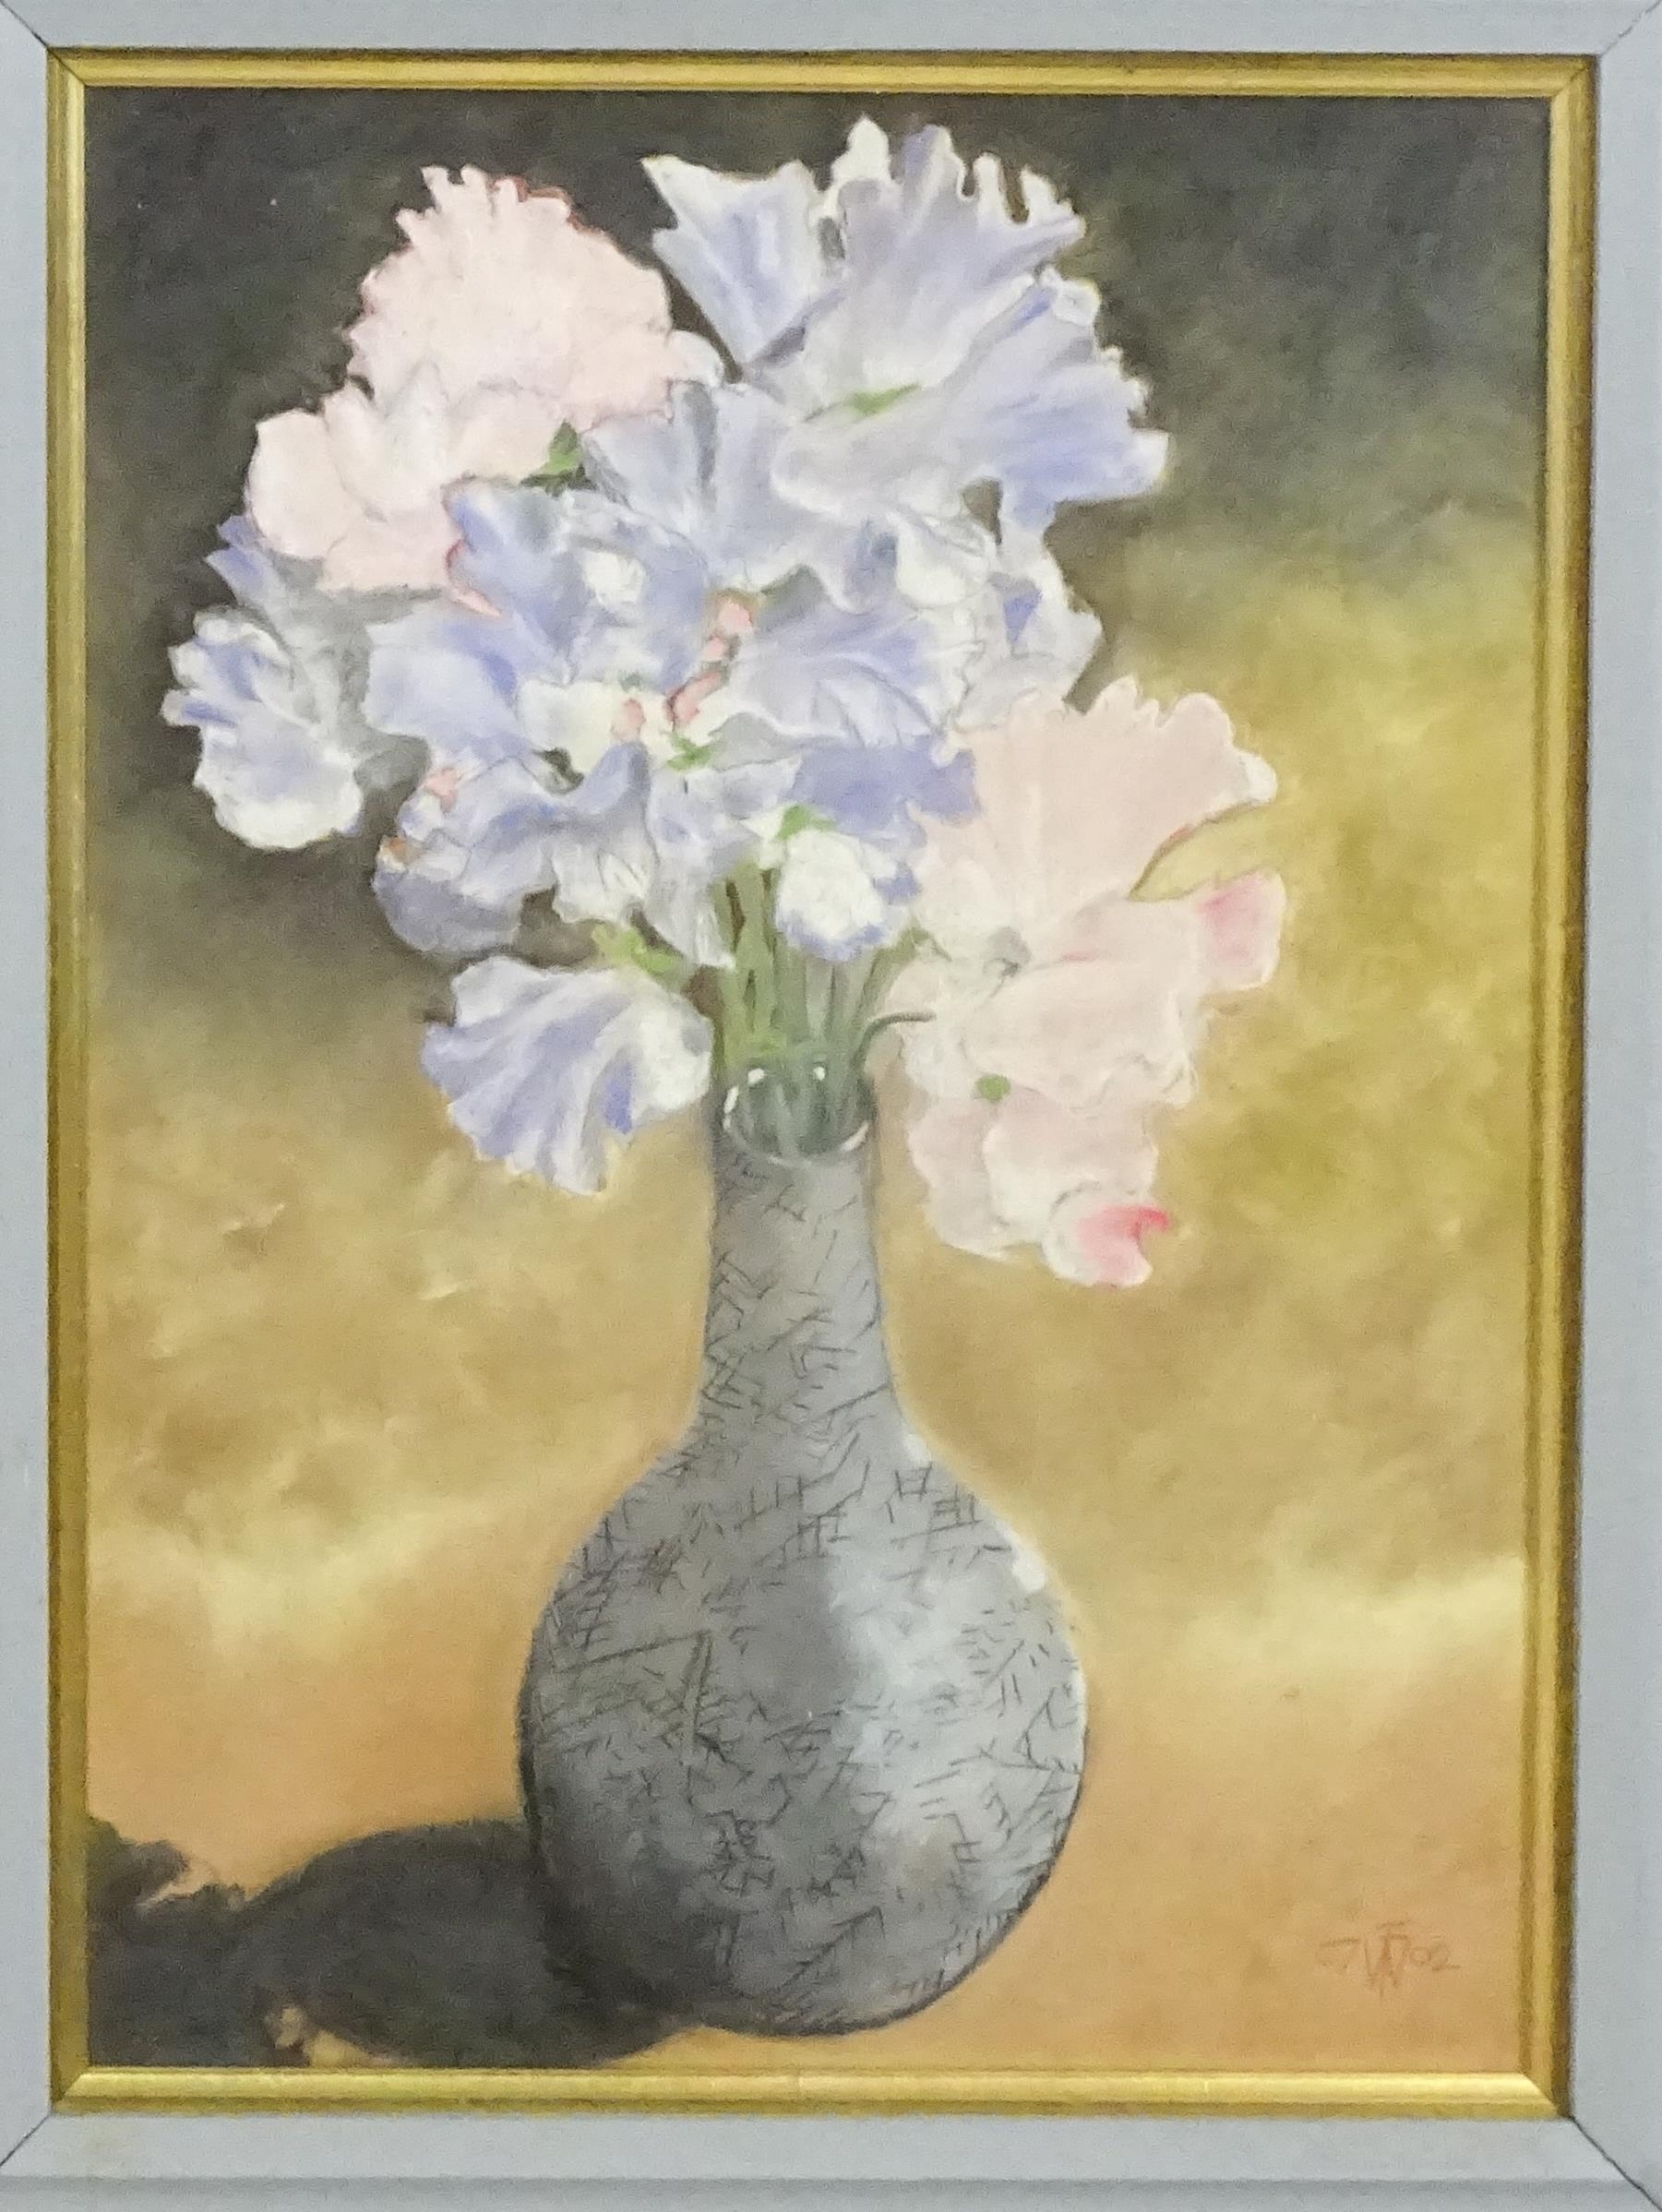 Early 21st century, Pastels, A still life study with pink and purple sweet pea flowers in a vase - Image 3 of 4